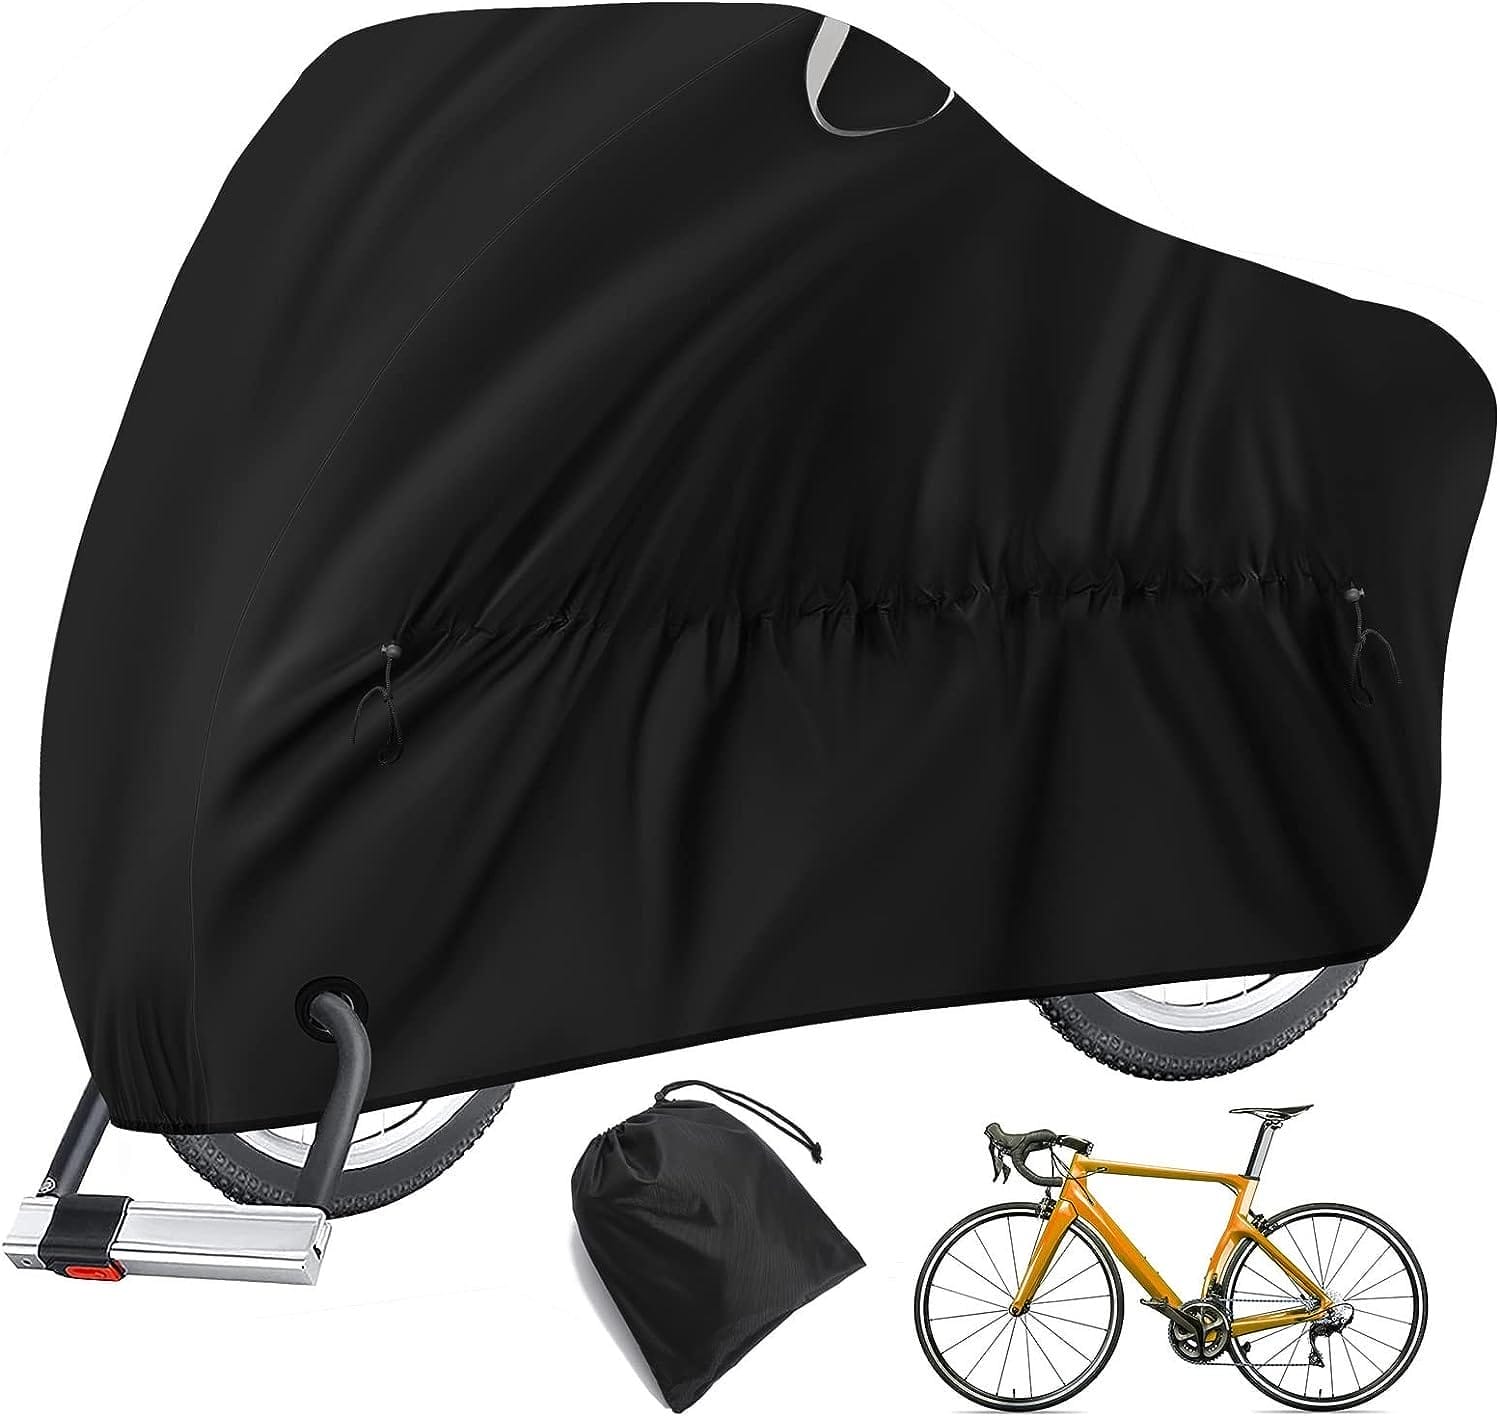 Read more about the article Waterproof Bike Cover Review